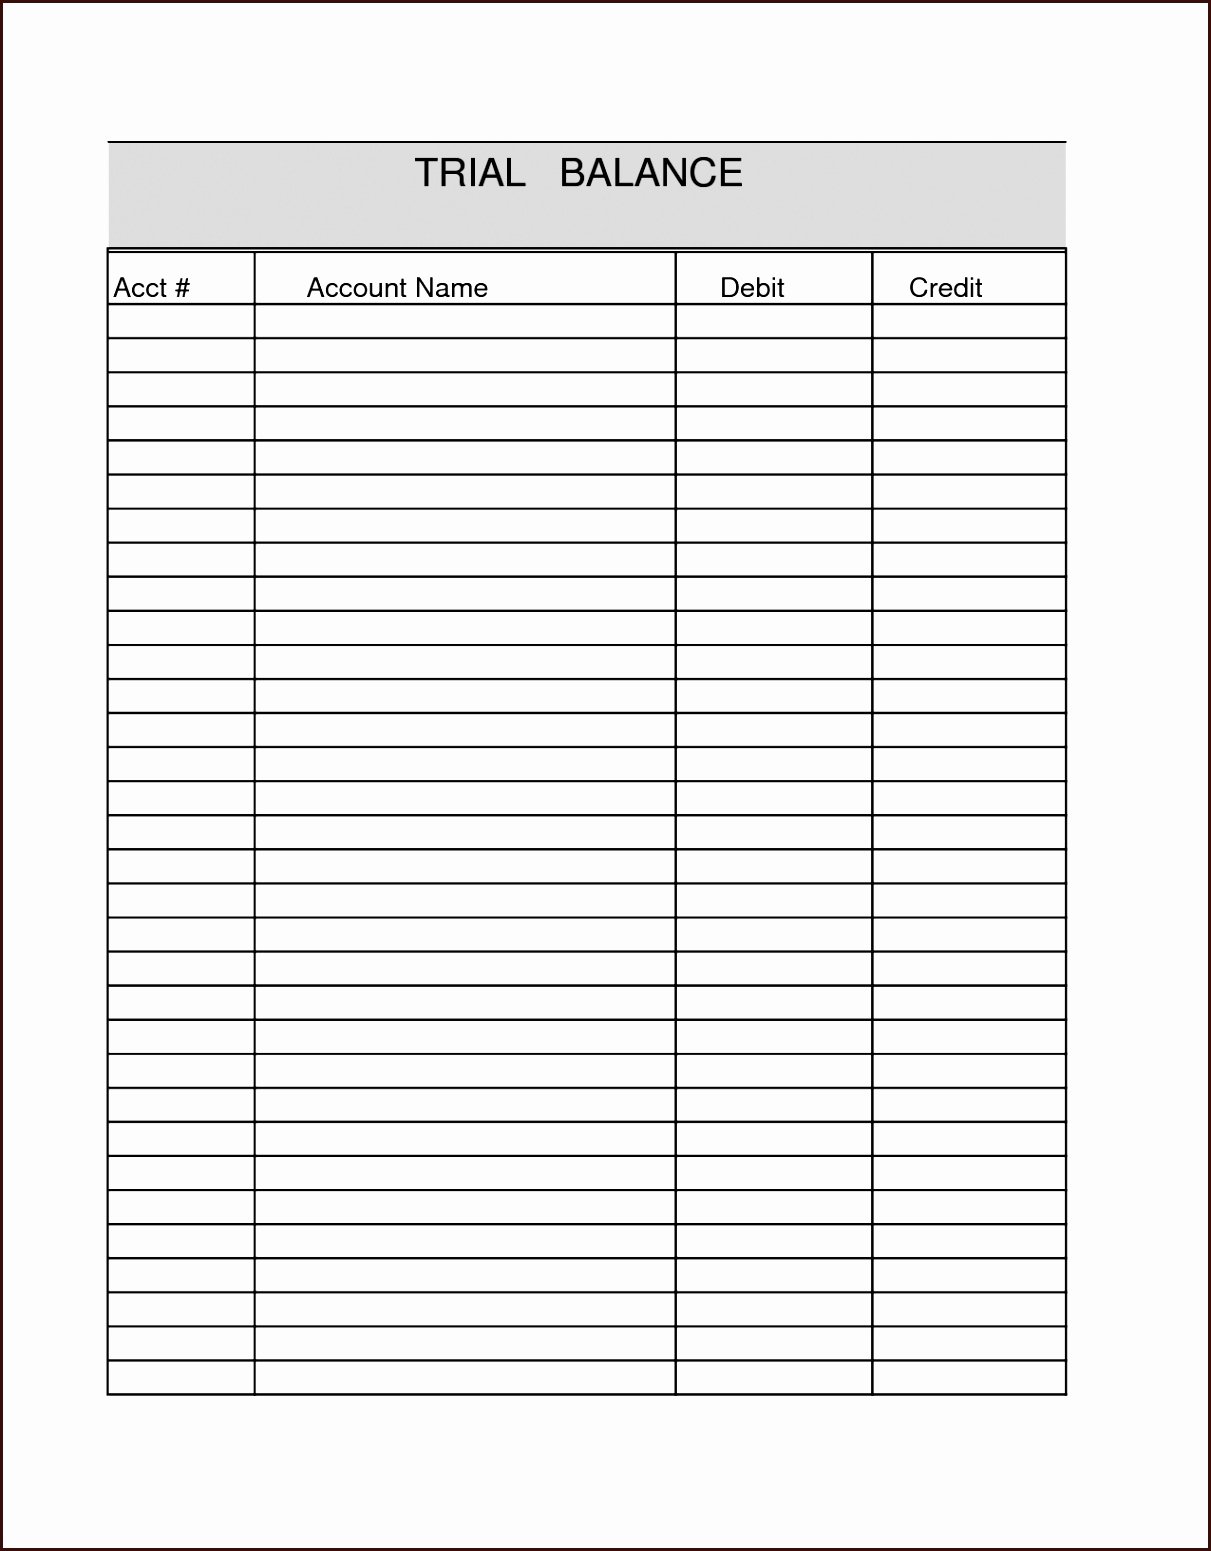 Trial Balance Template Excel Unique Blank Trial Balance Sheet Excel Spreadsheet Template Blank